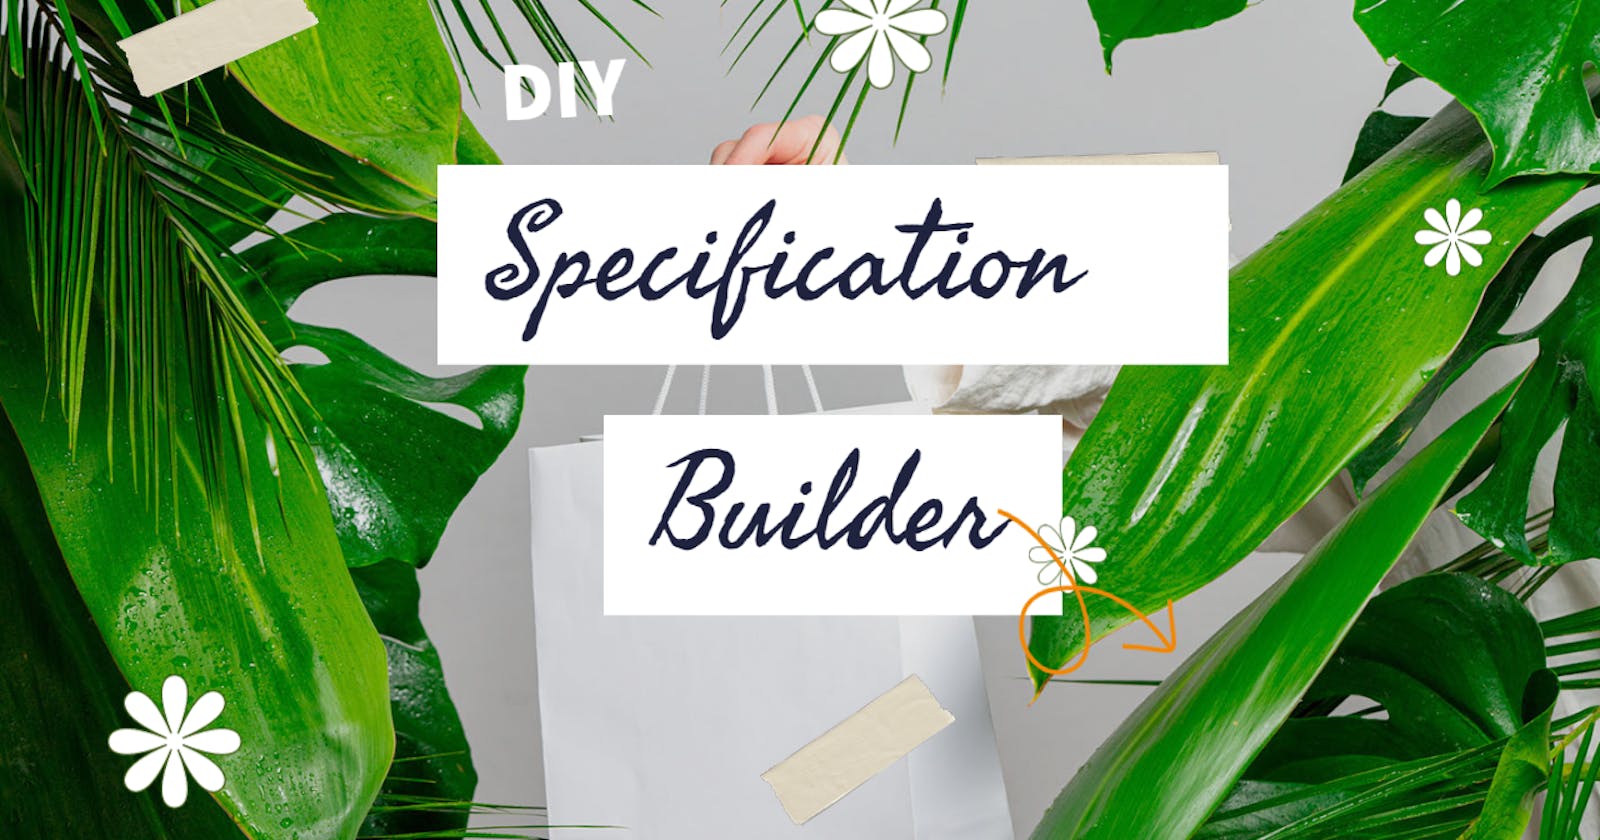 Why use SpecificationBuilder ?